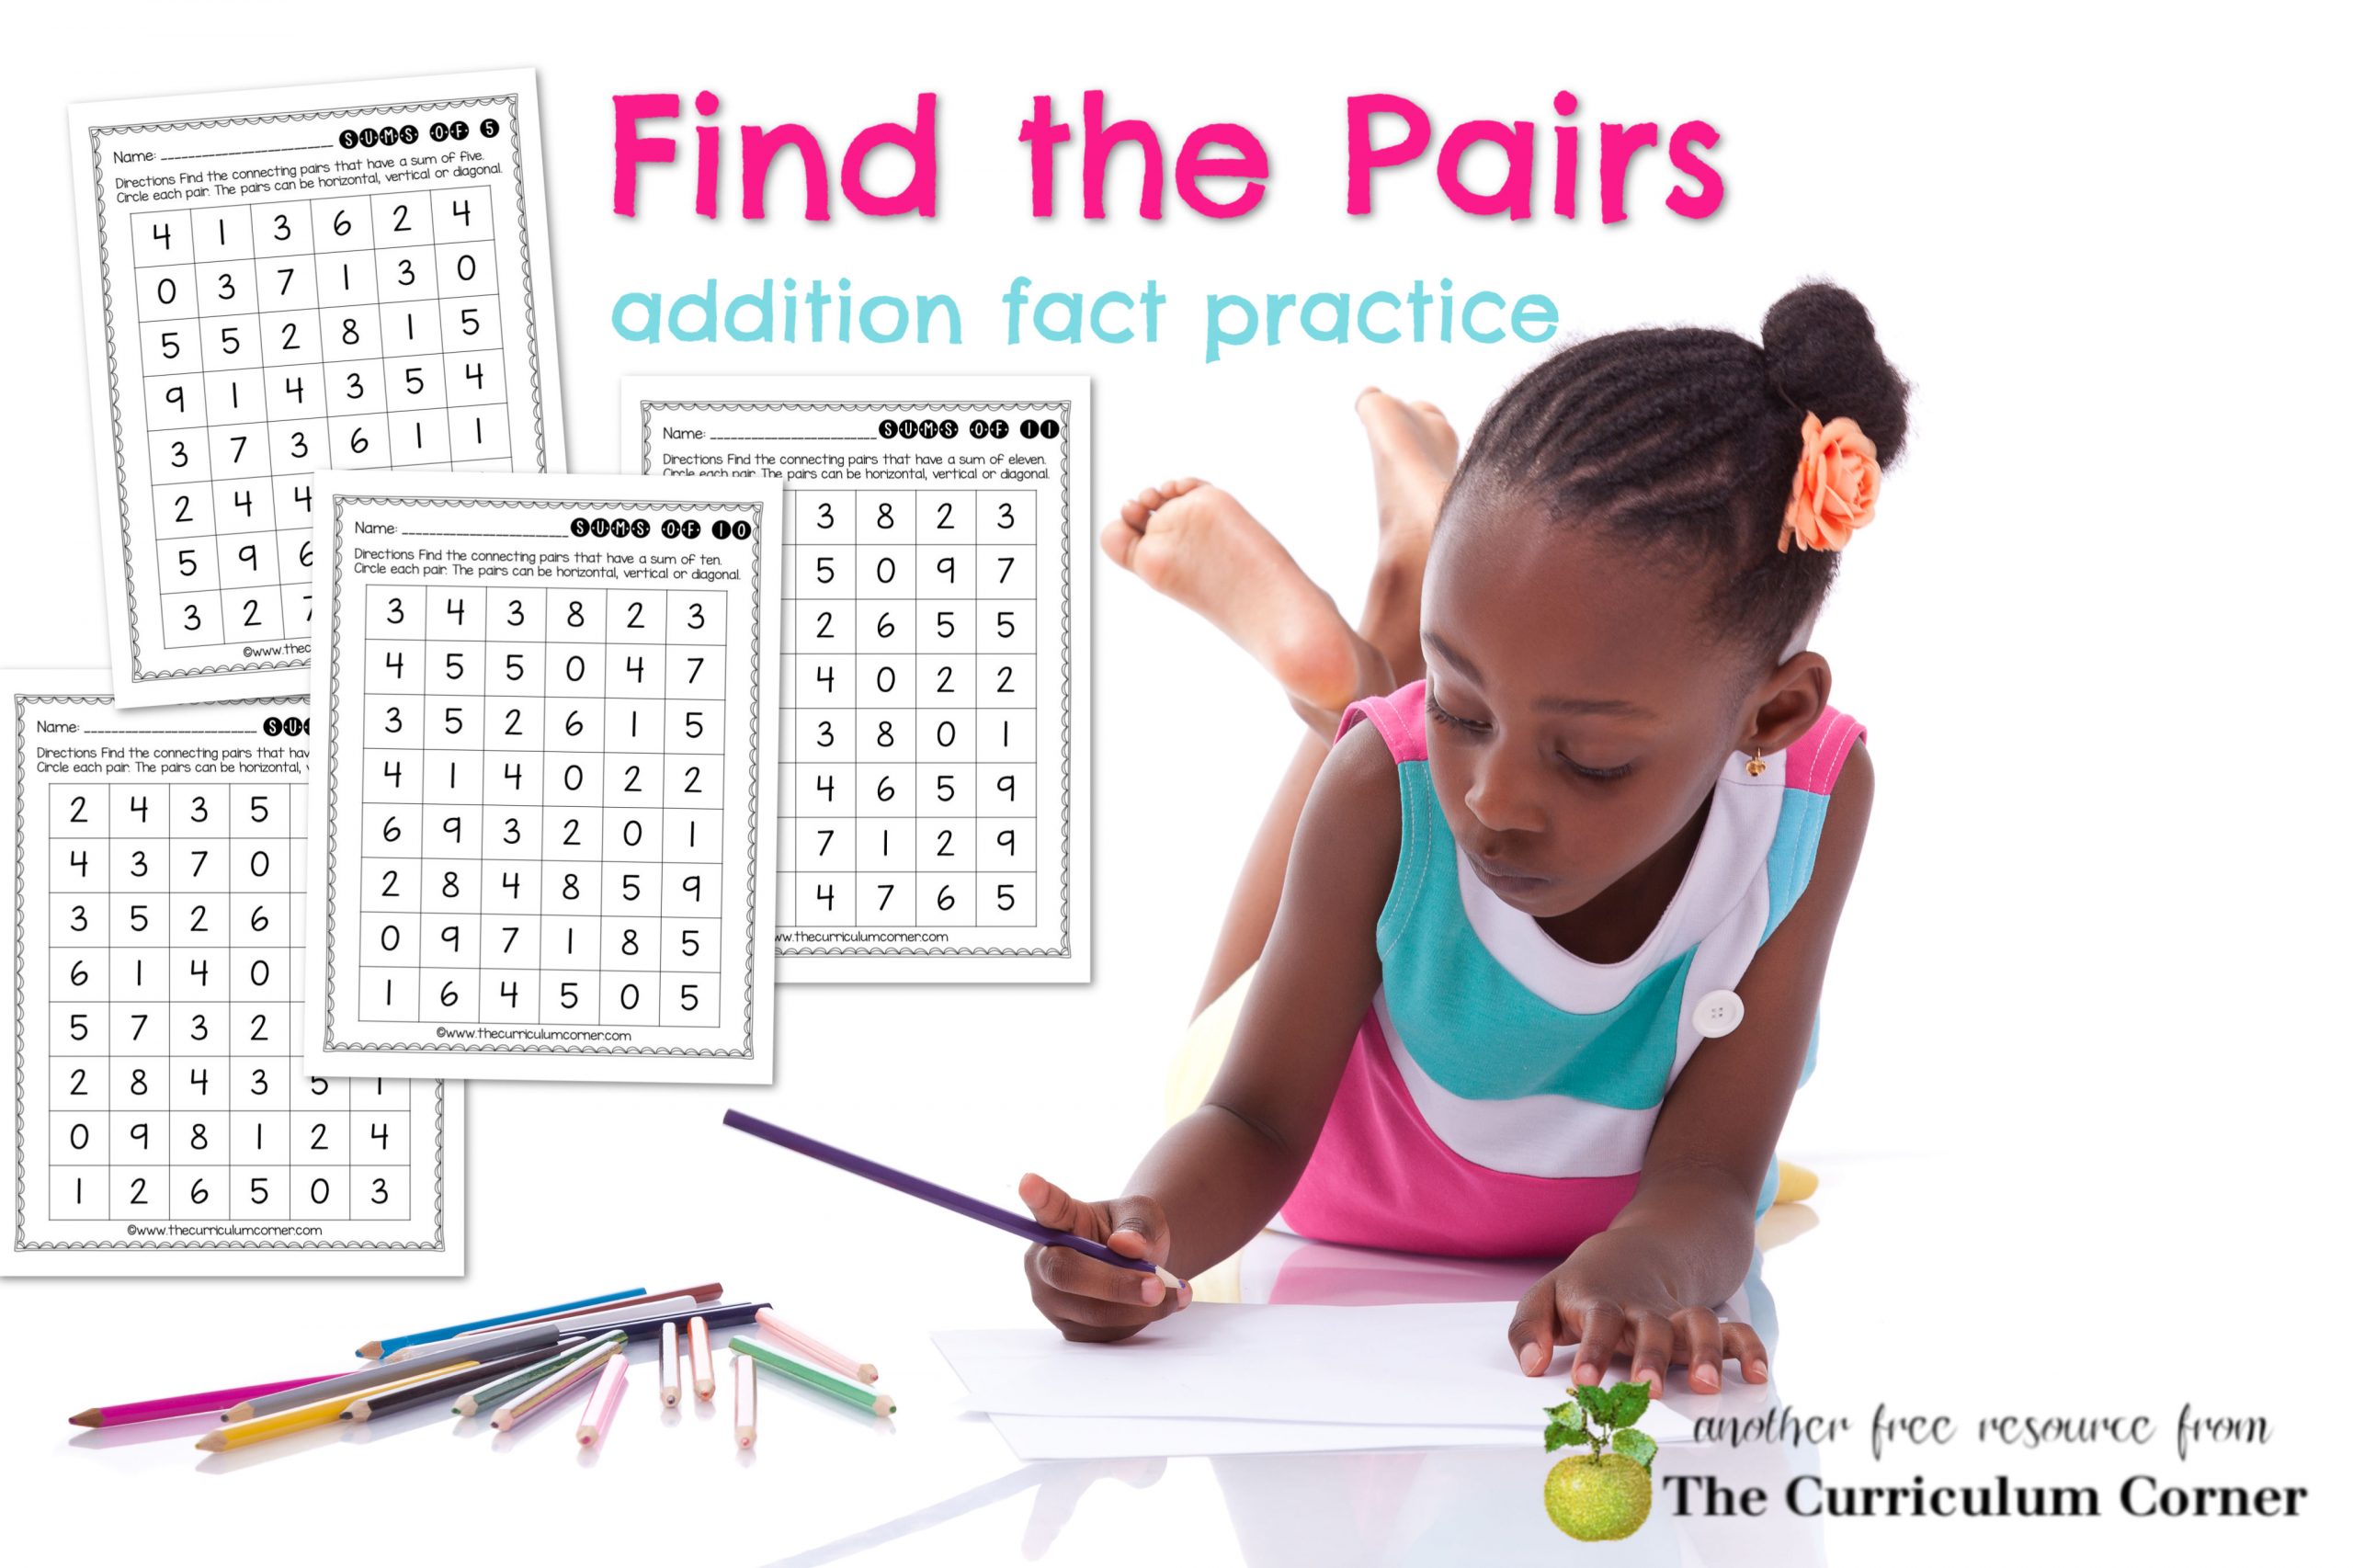 addition-facts-practice-pages-find-the-pairs-the-curriculum-corner-123